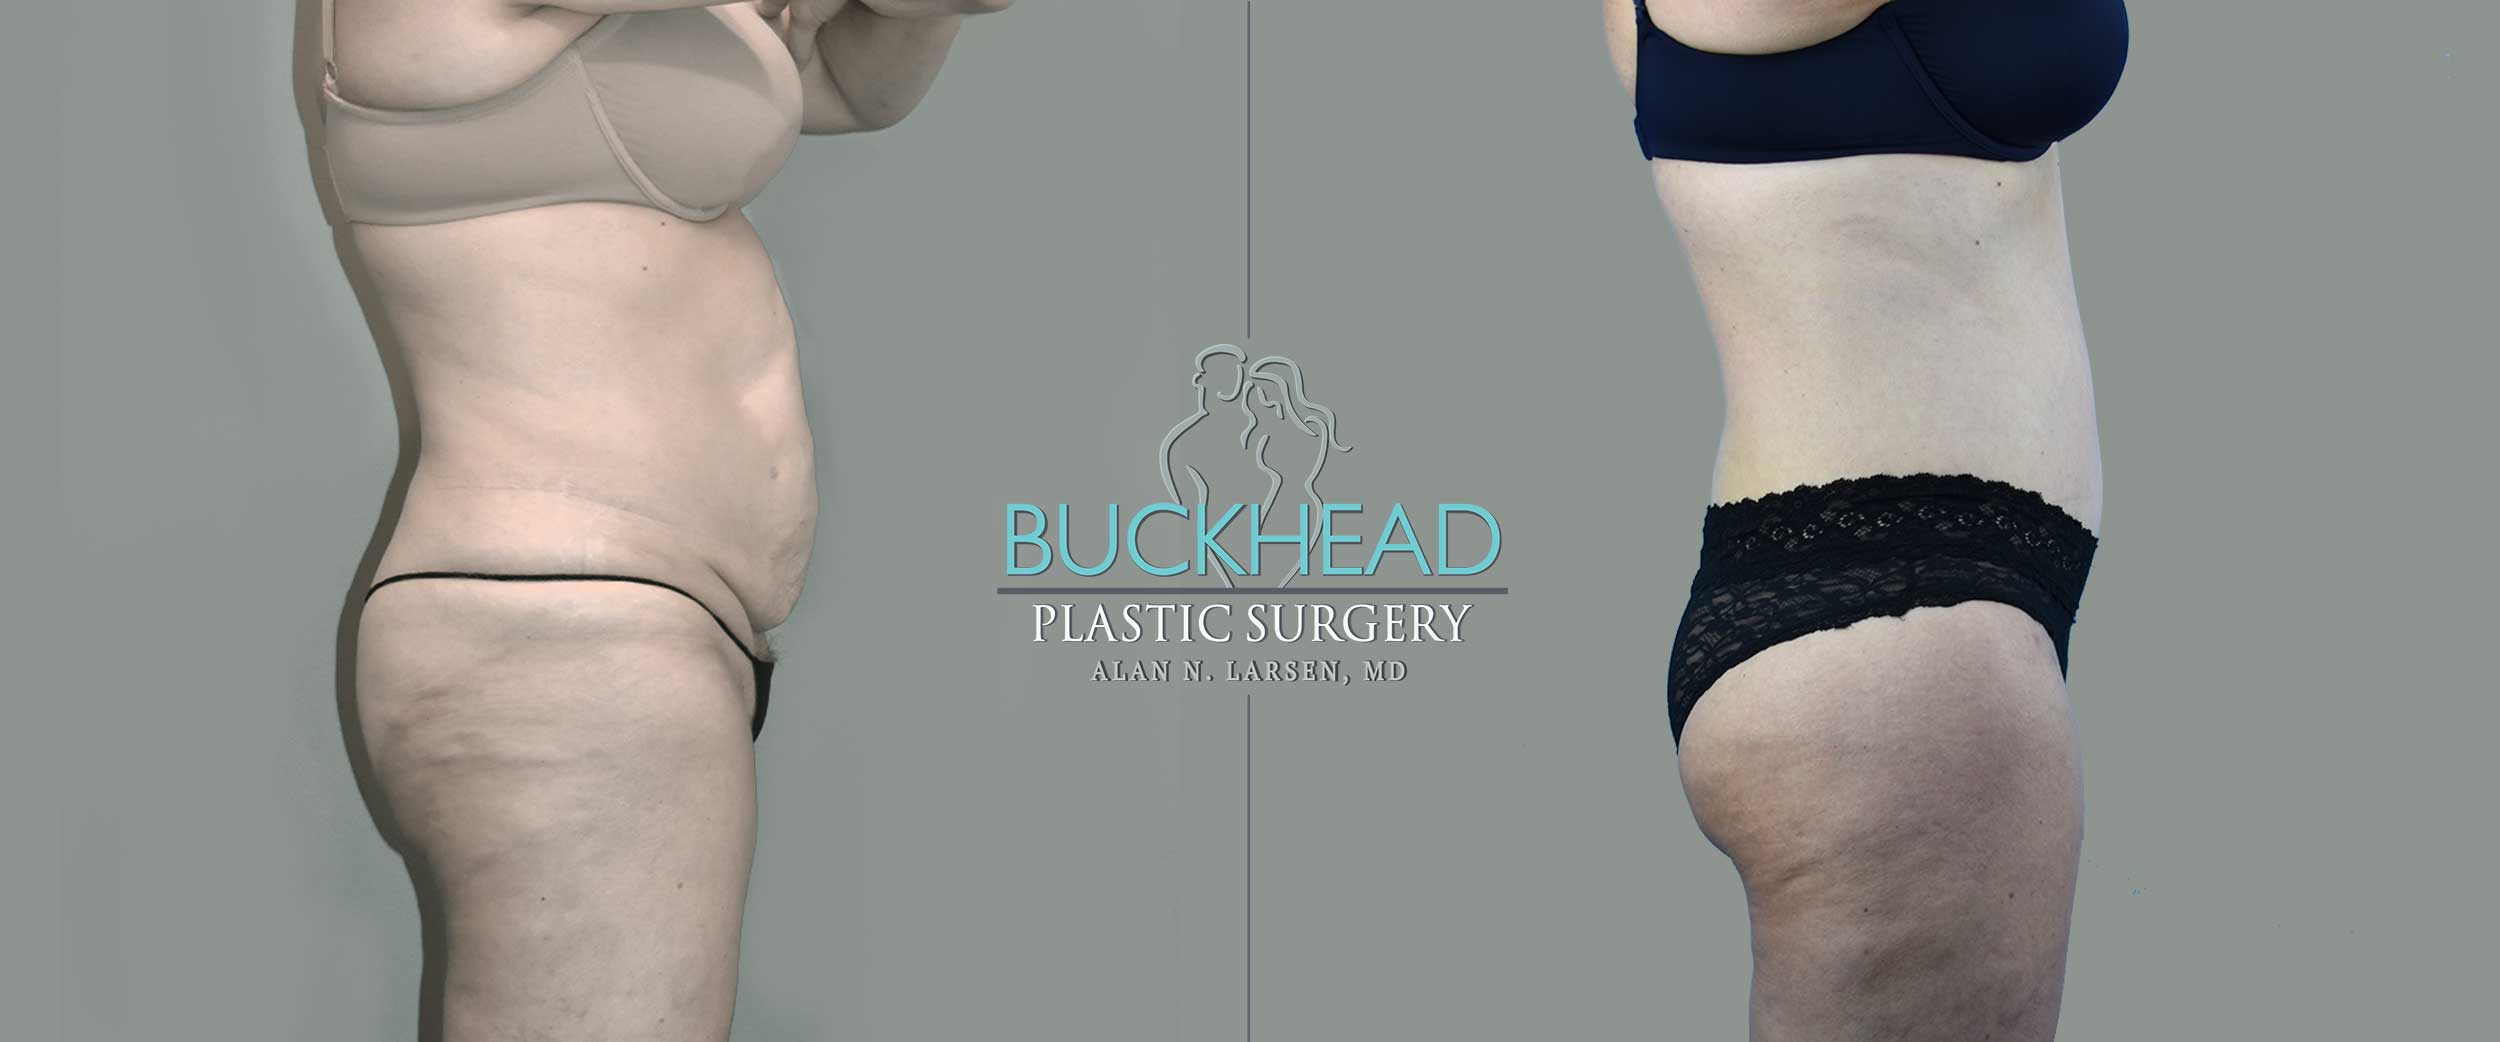 Why Should I Choose Buckhead Plastic Surgery for My Body Lift or Mommy Makeover?